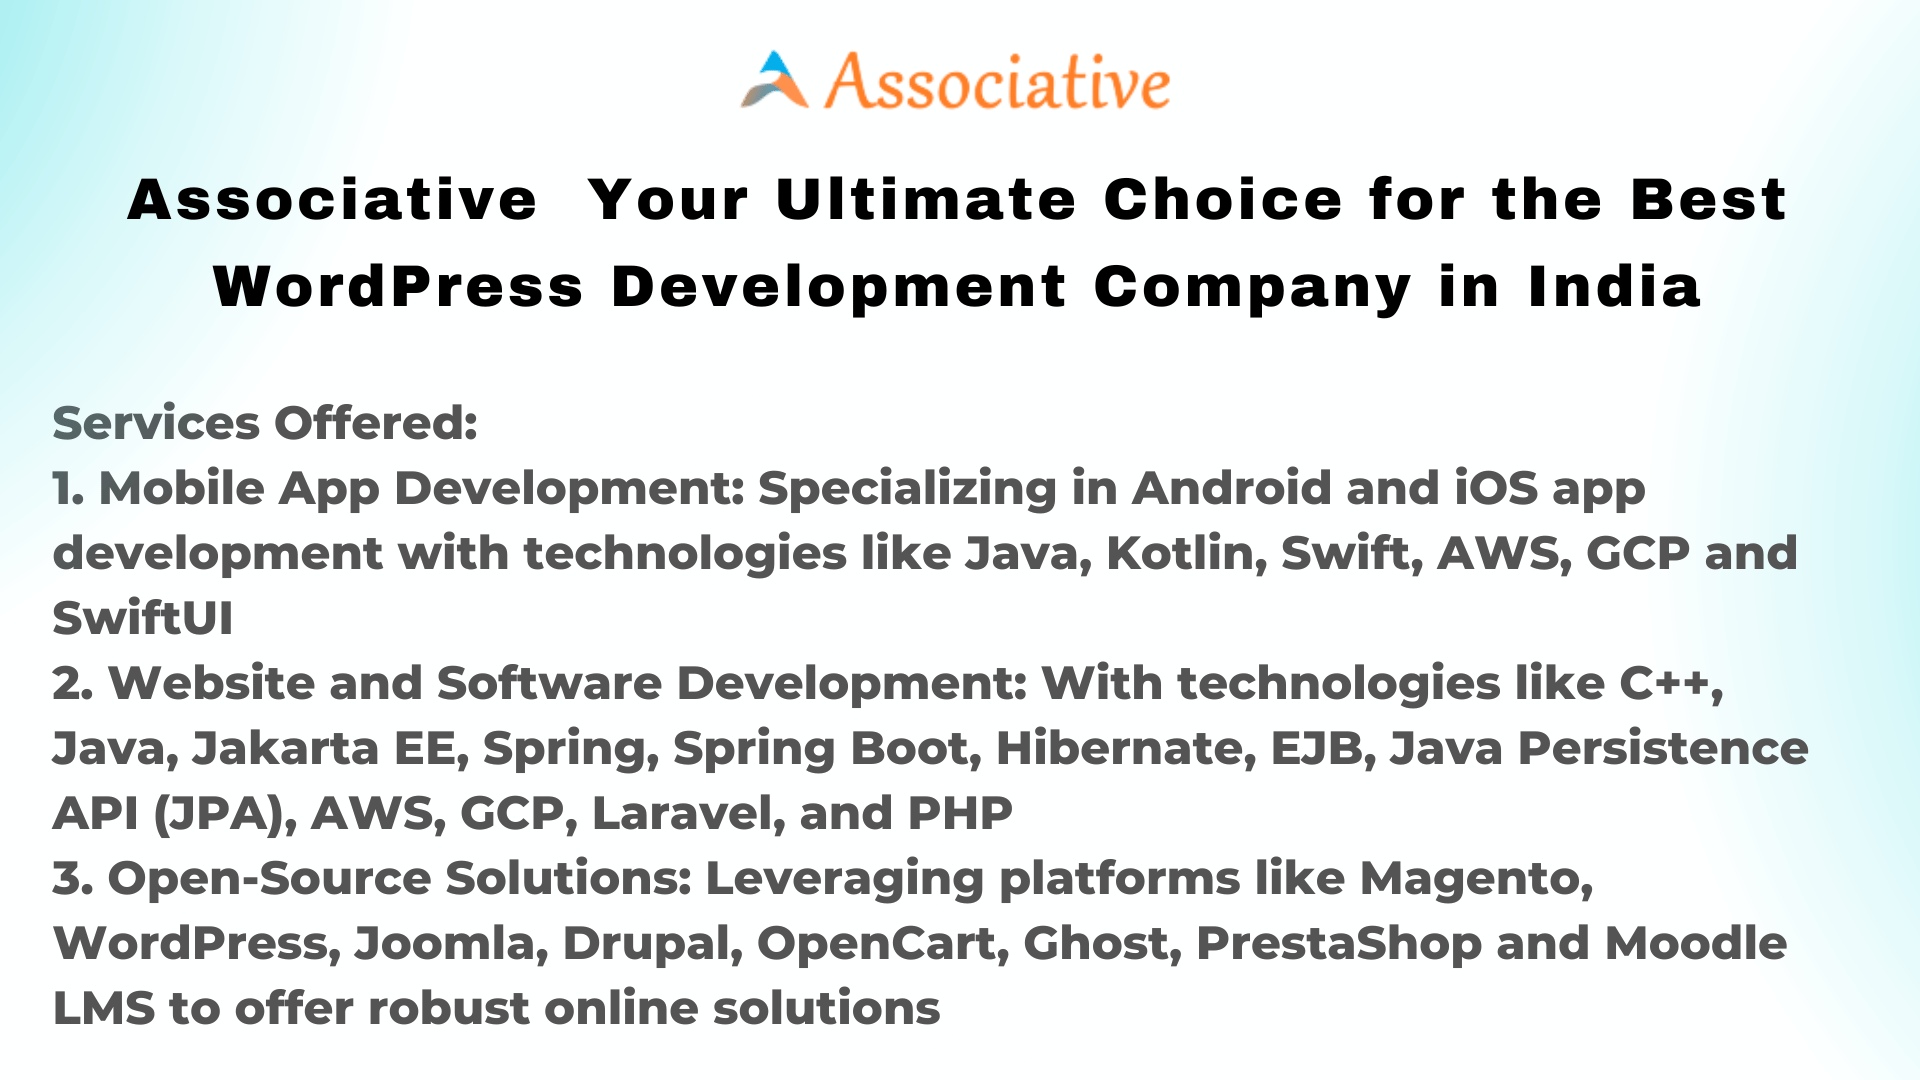 Associative Your Ultimate Choice for the Best WordPress Development Company in India